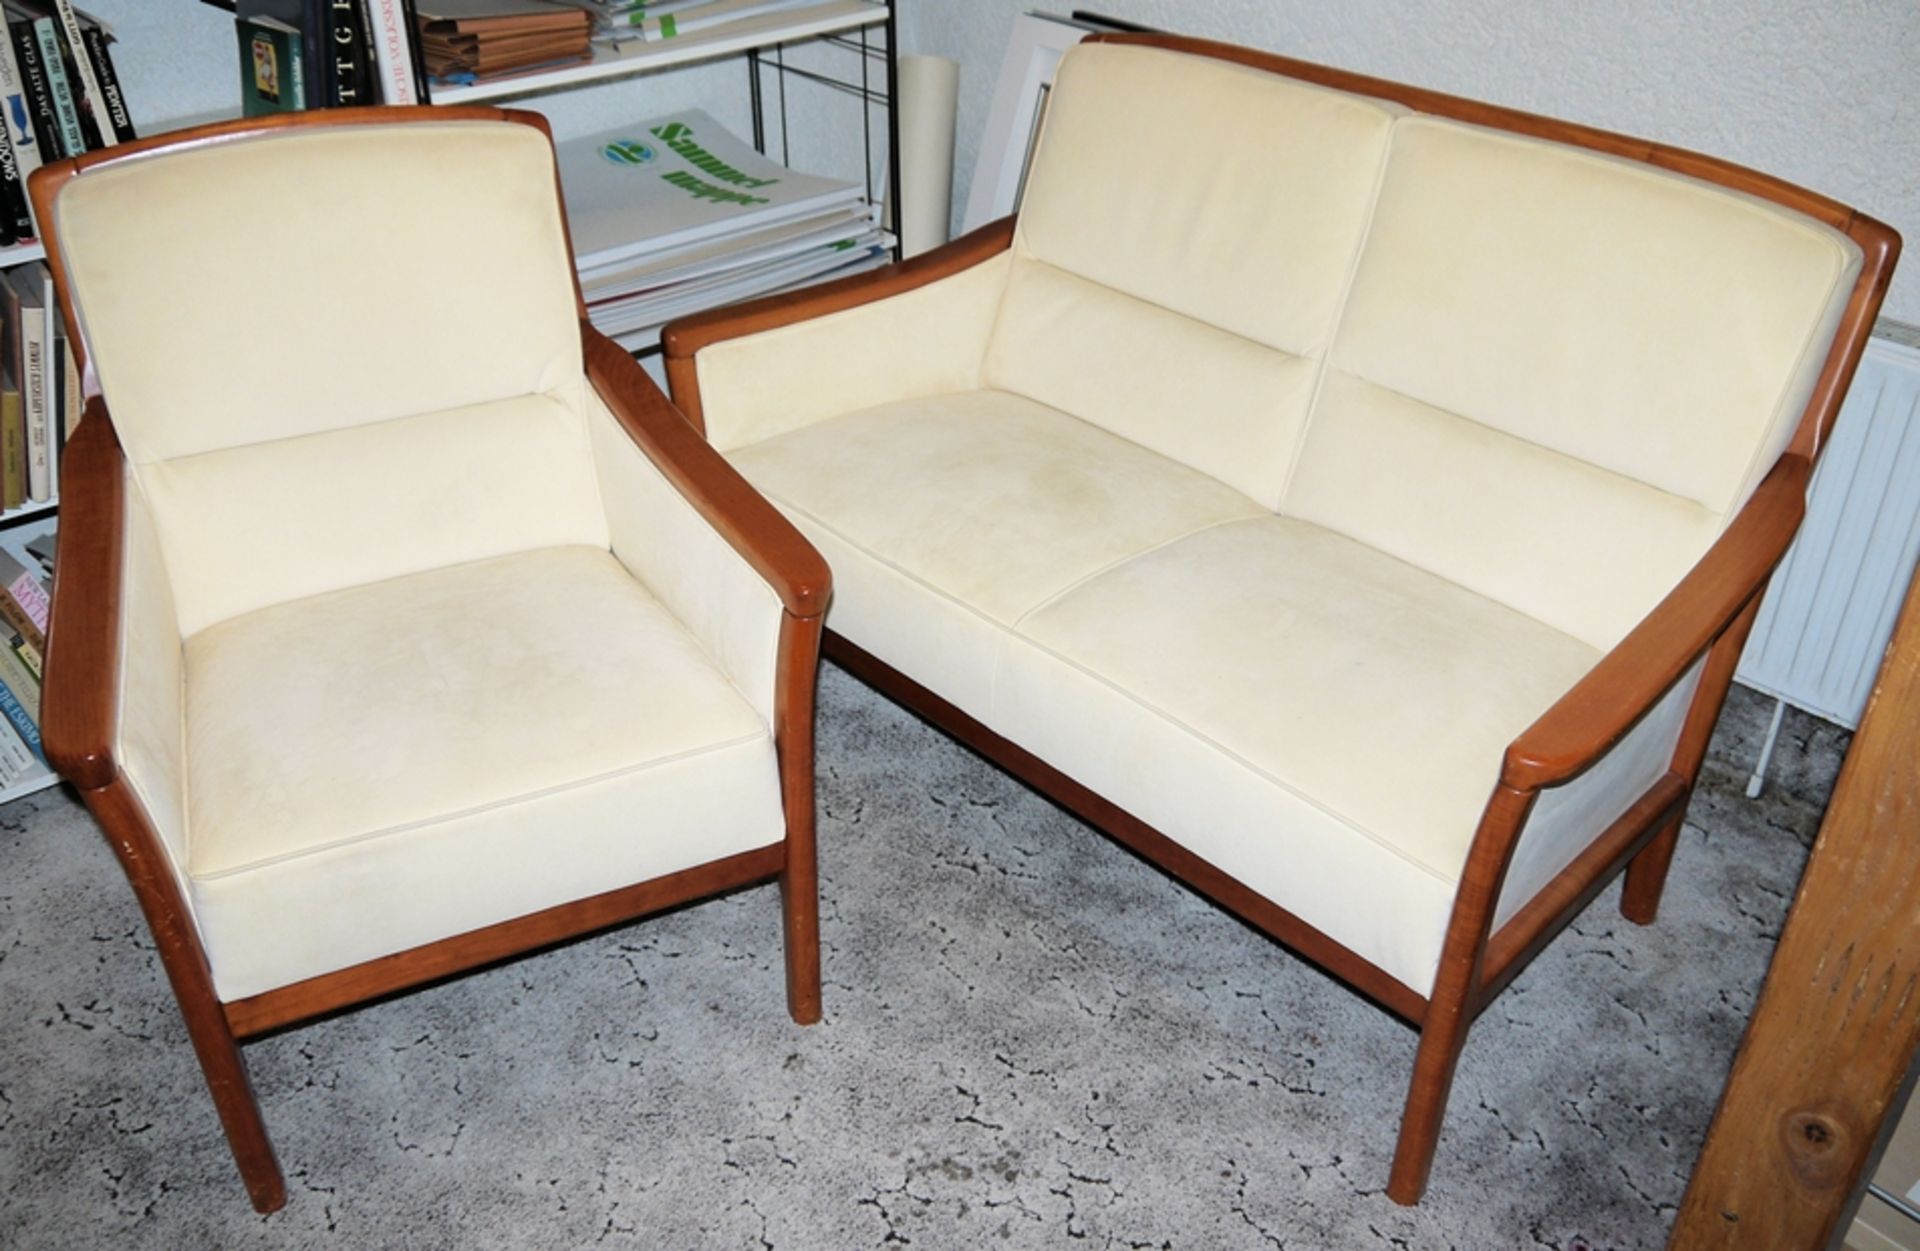 Elegant couch with armchair, Skan design circa 1980